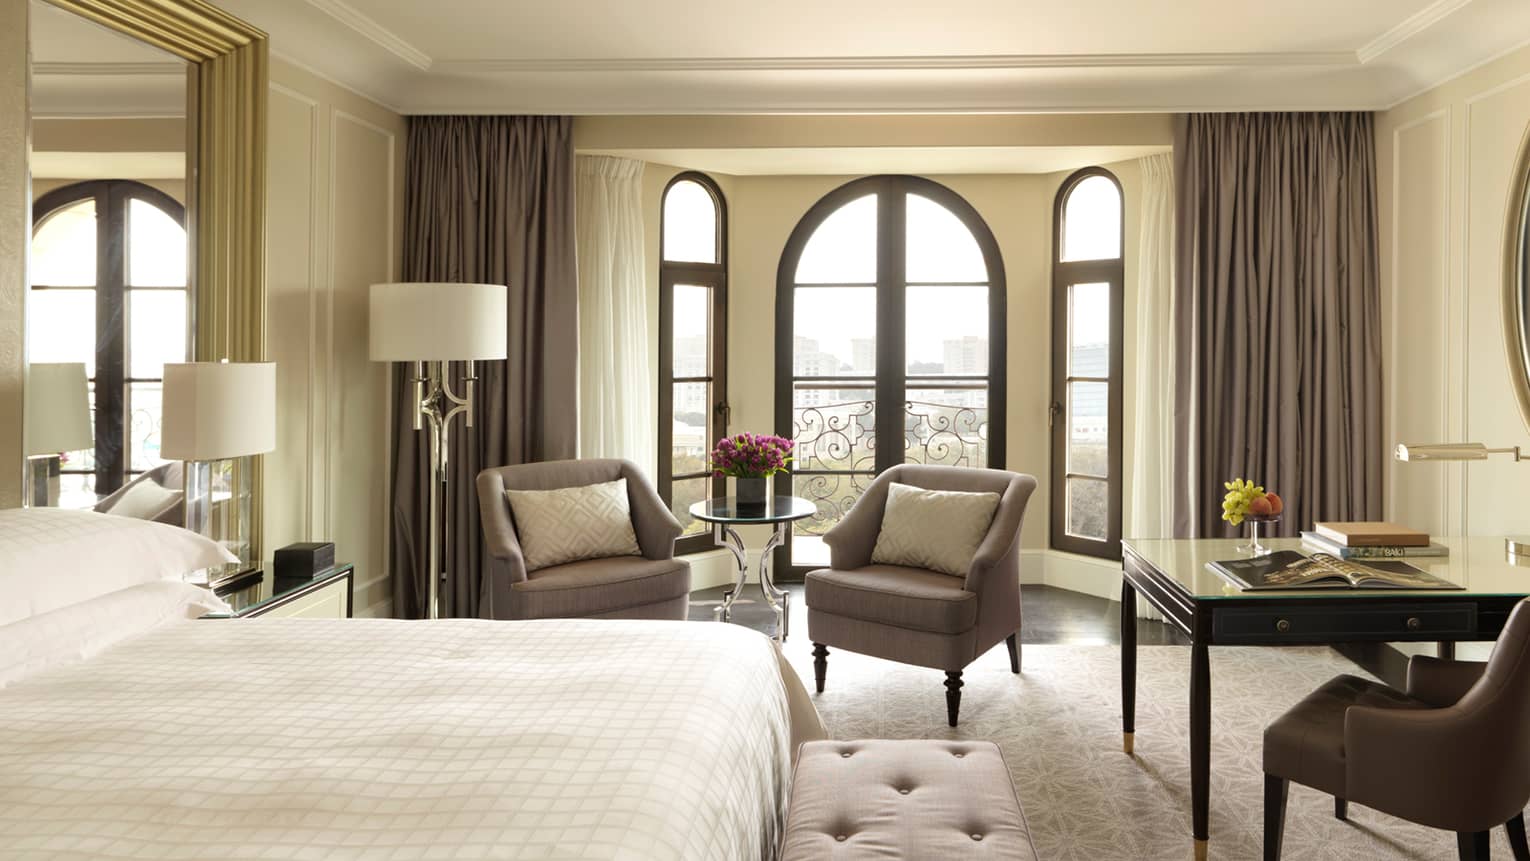 Sunny Deluxe Caspian Room hotel room with arched French doors, two armchairs, desk, bed